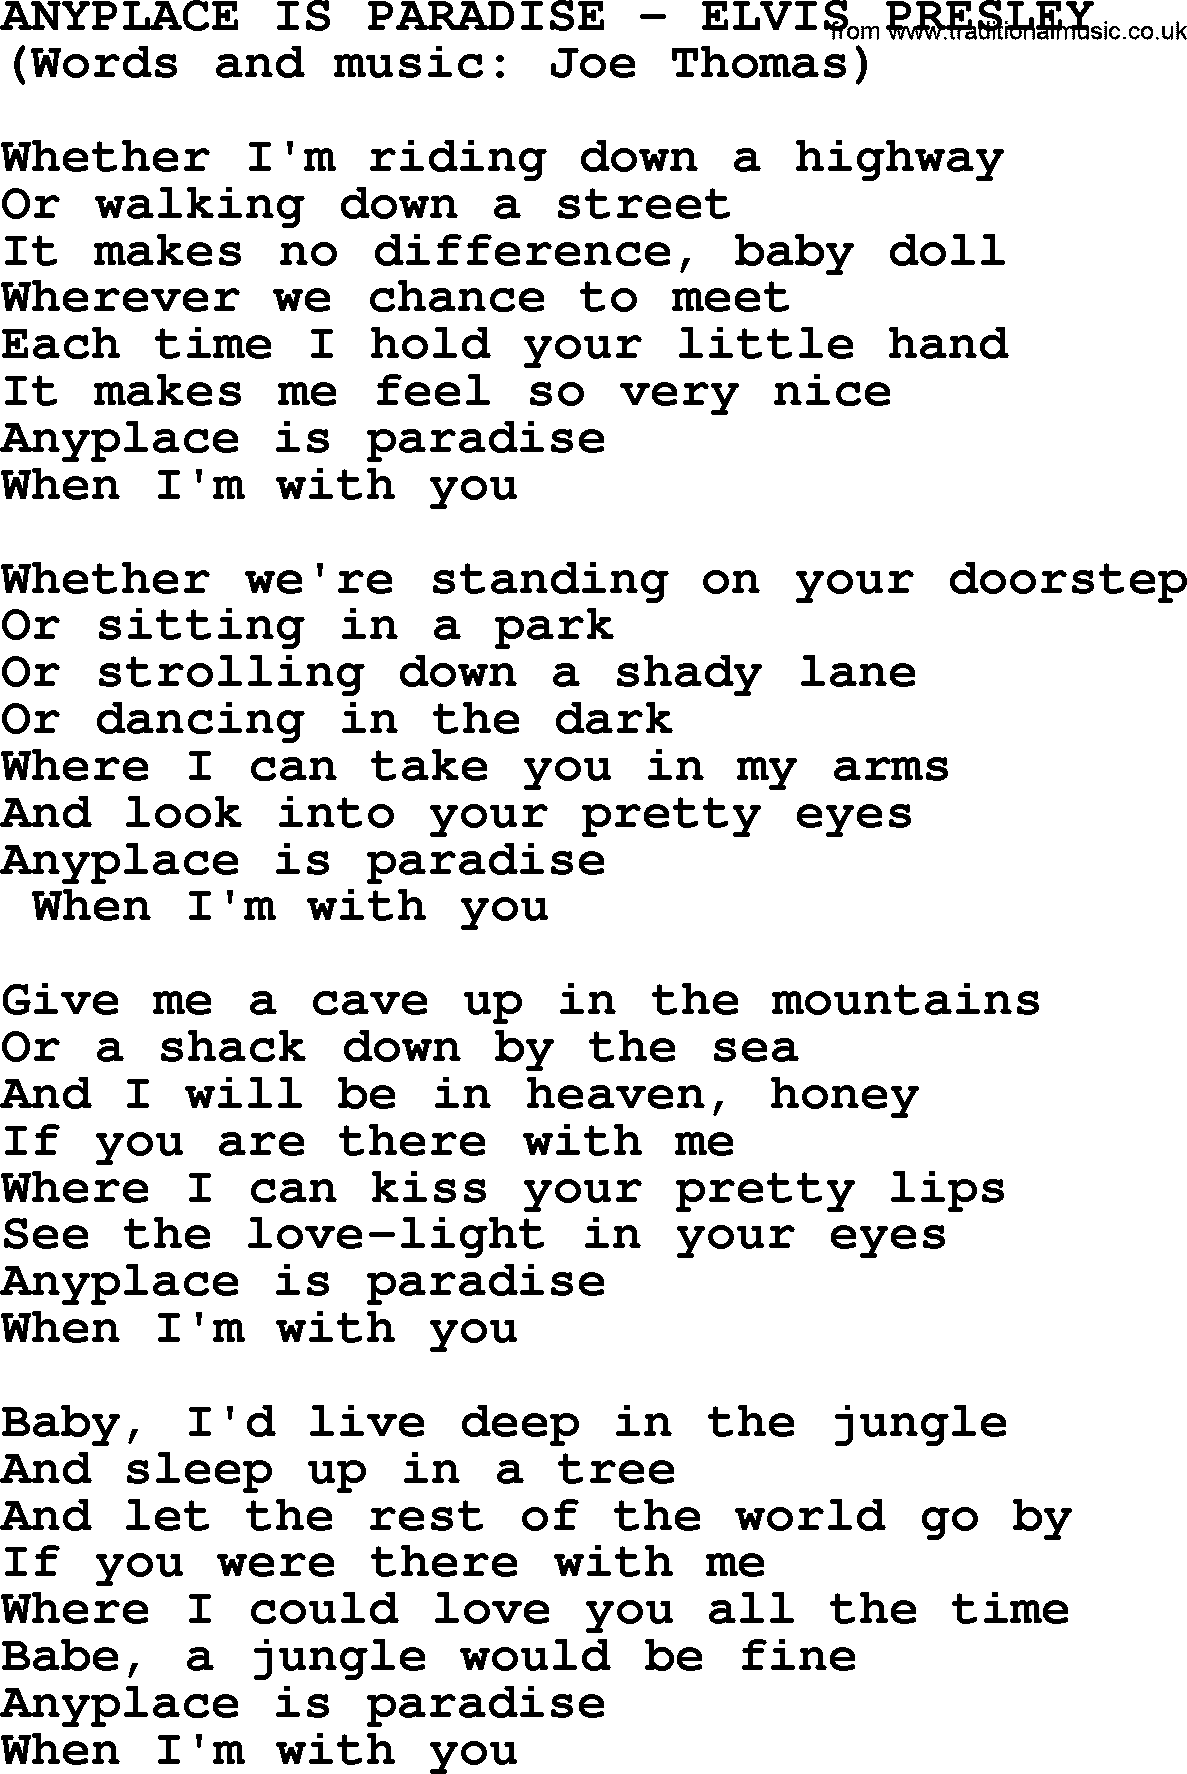 Elvis Presley song: Anyplace Is Paradise lyrics